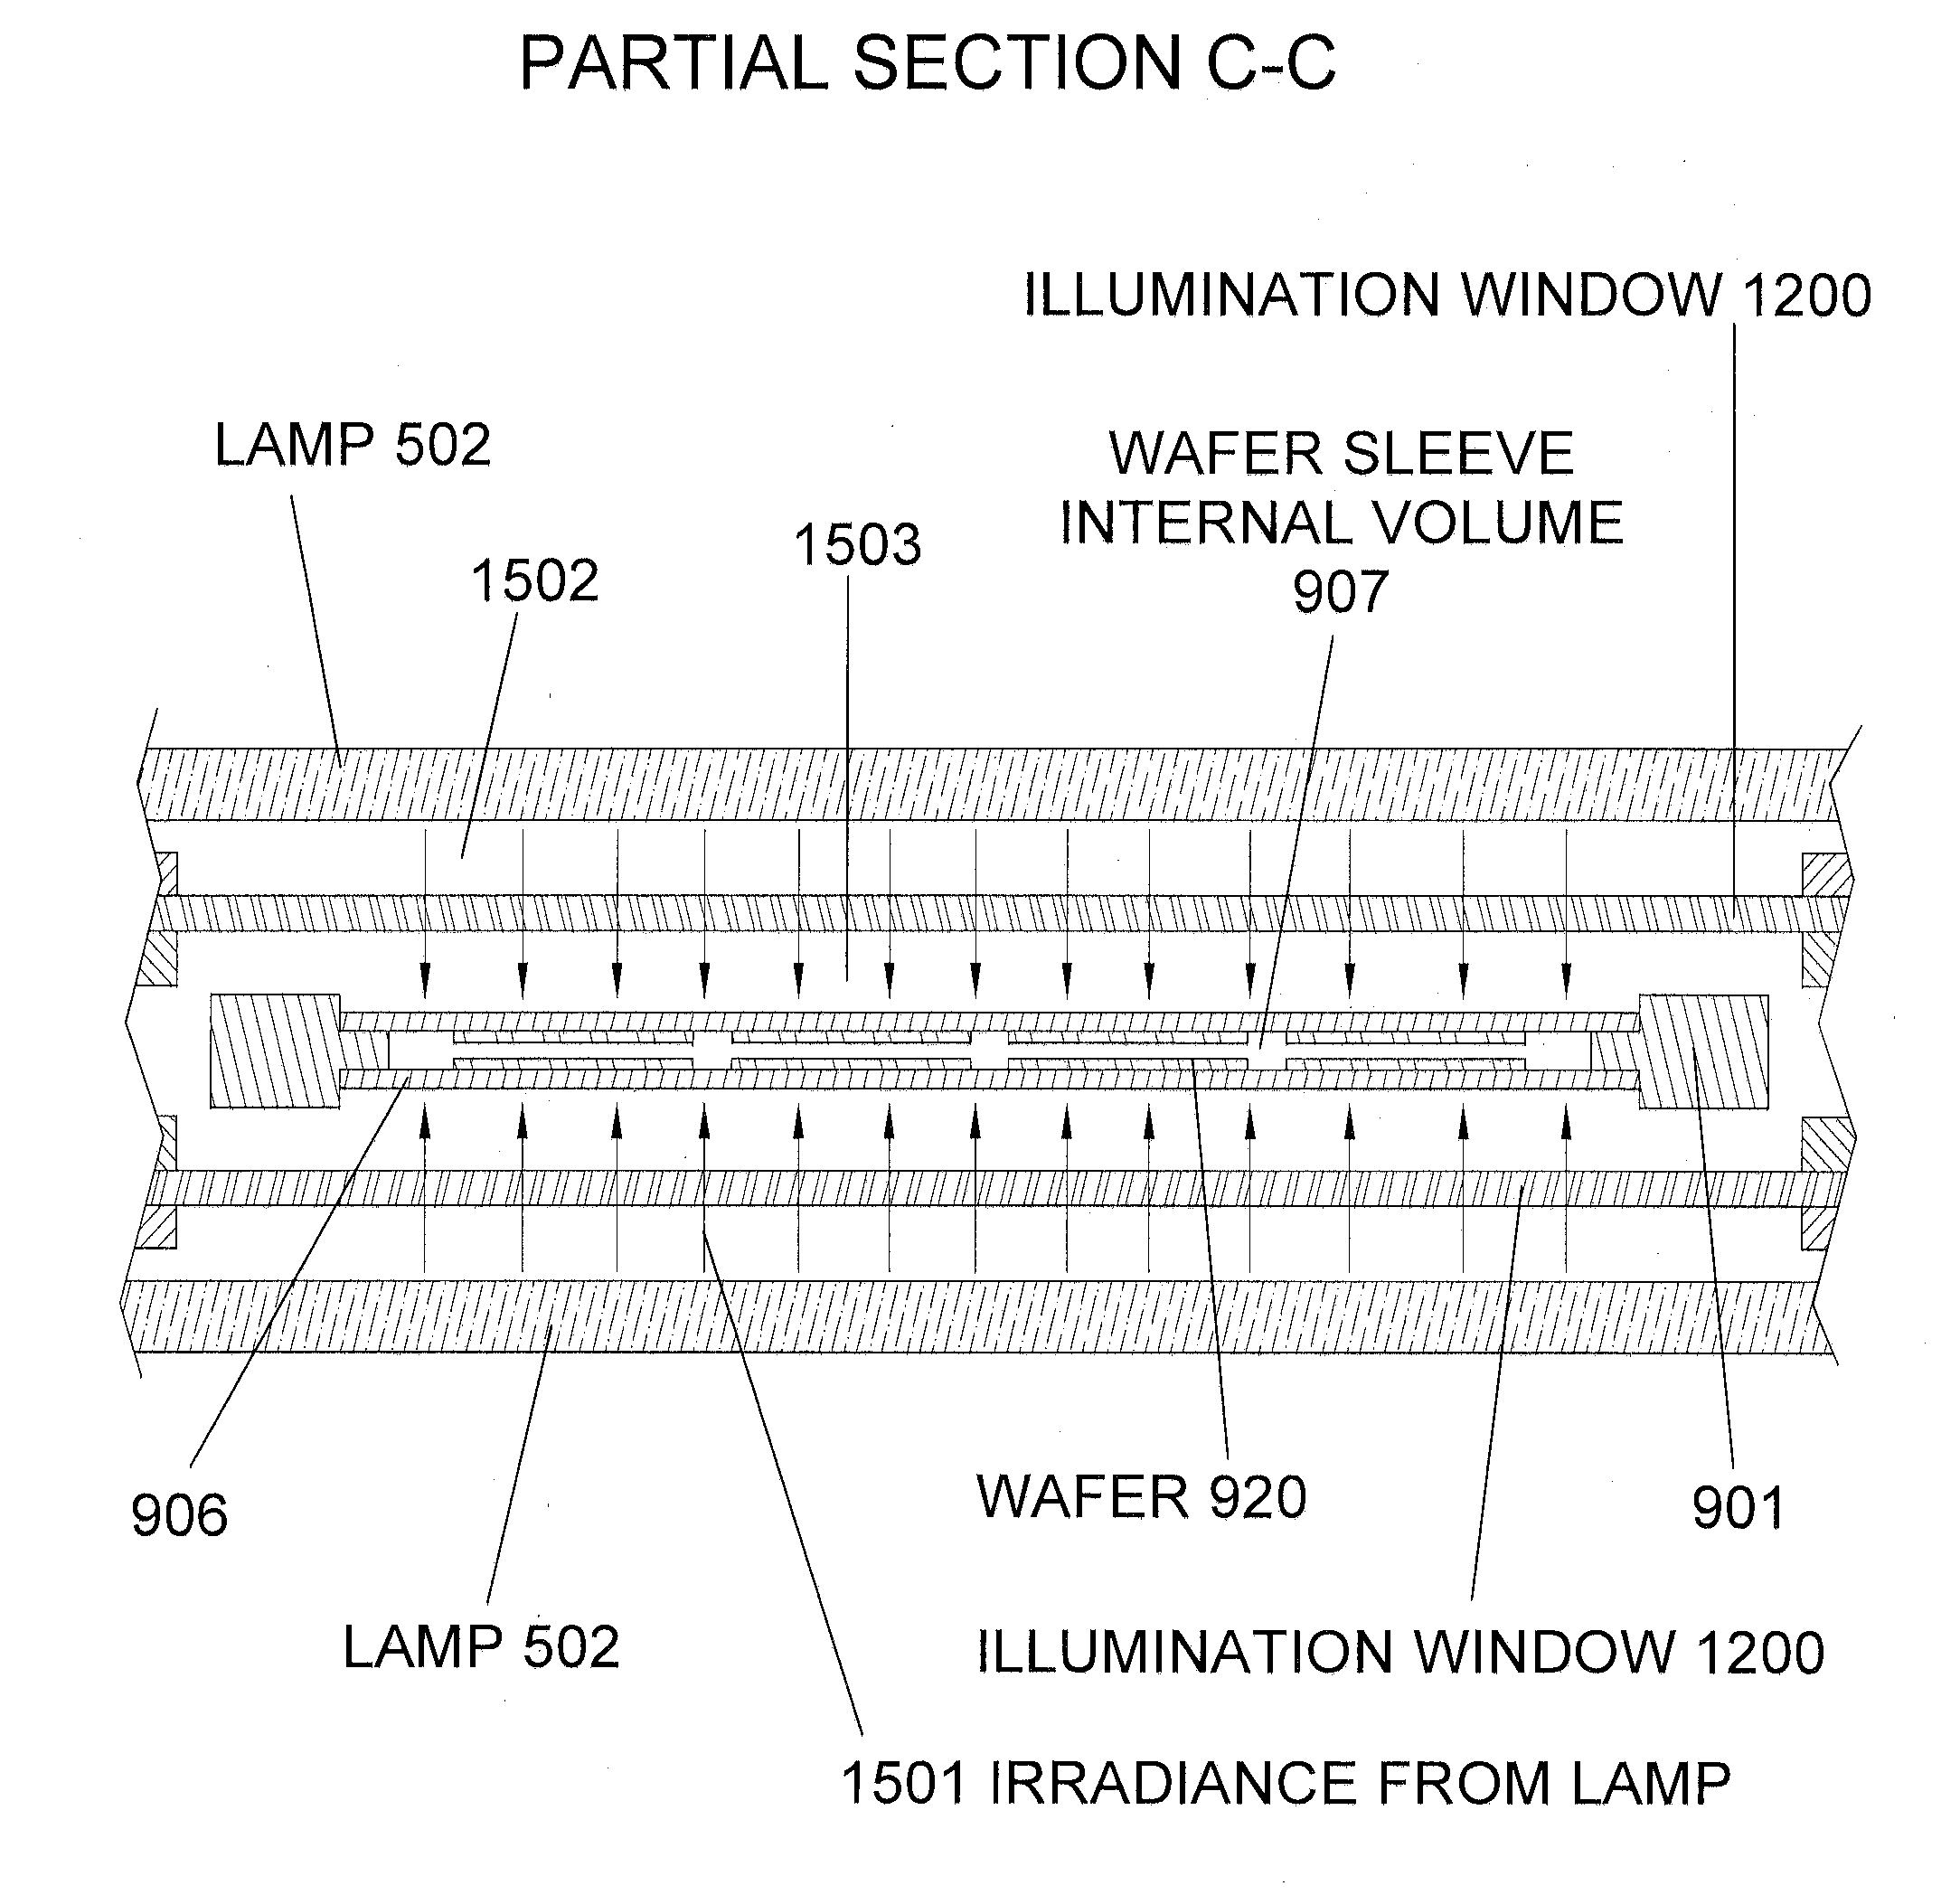 High throughput epitaxial deposition system for single crystal solar devices